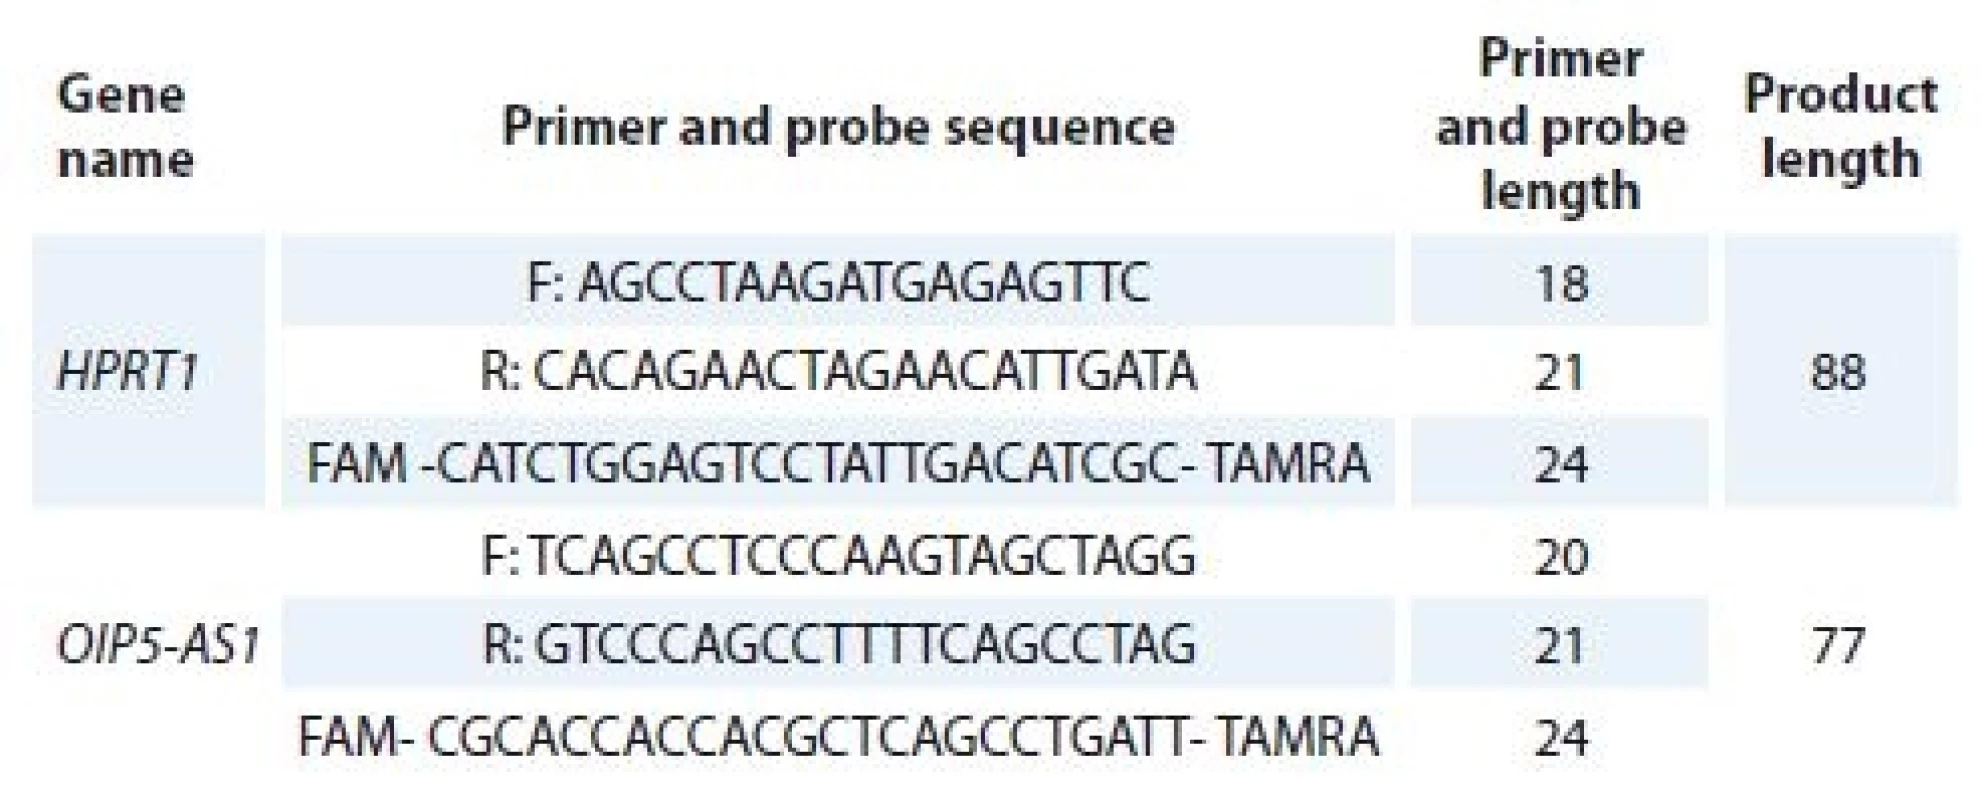 The primers and probes sequences and PCR product length.